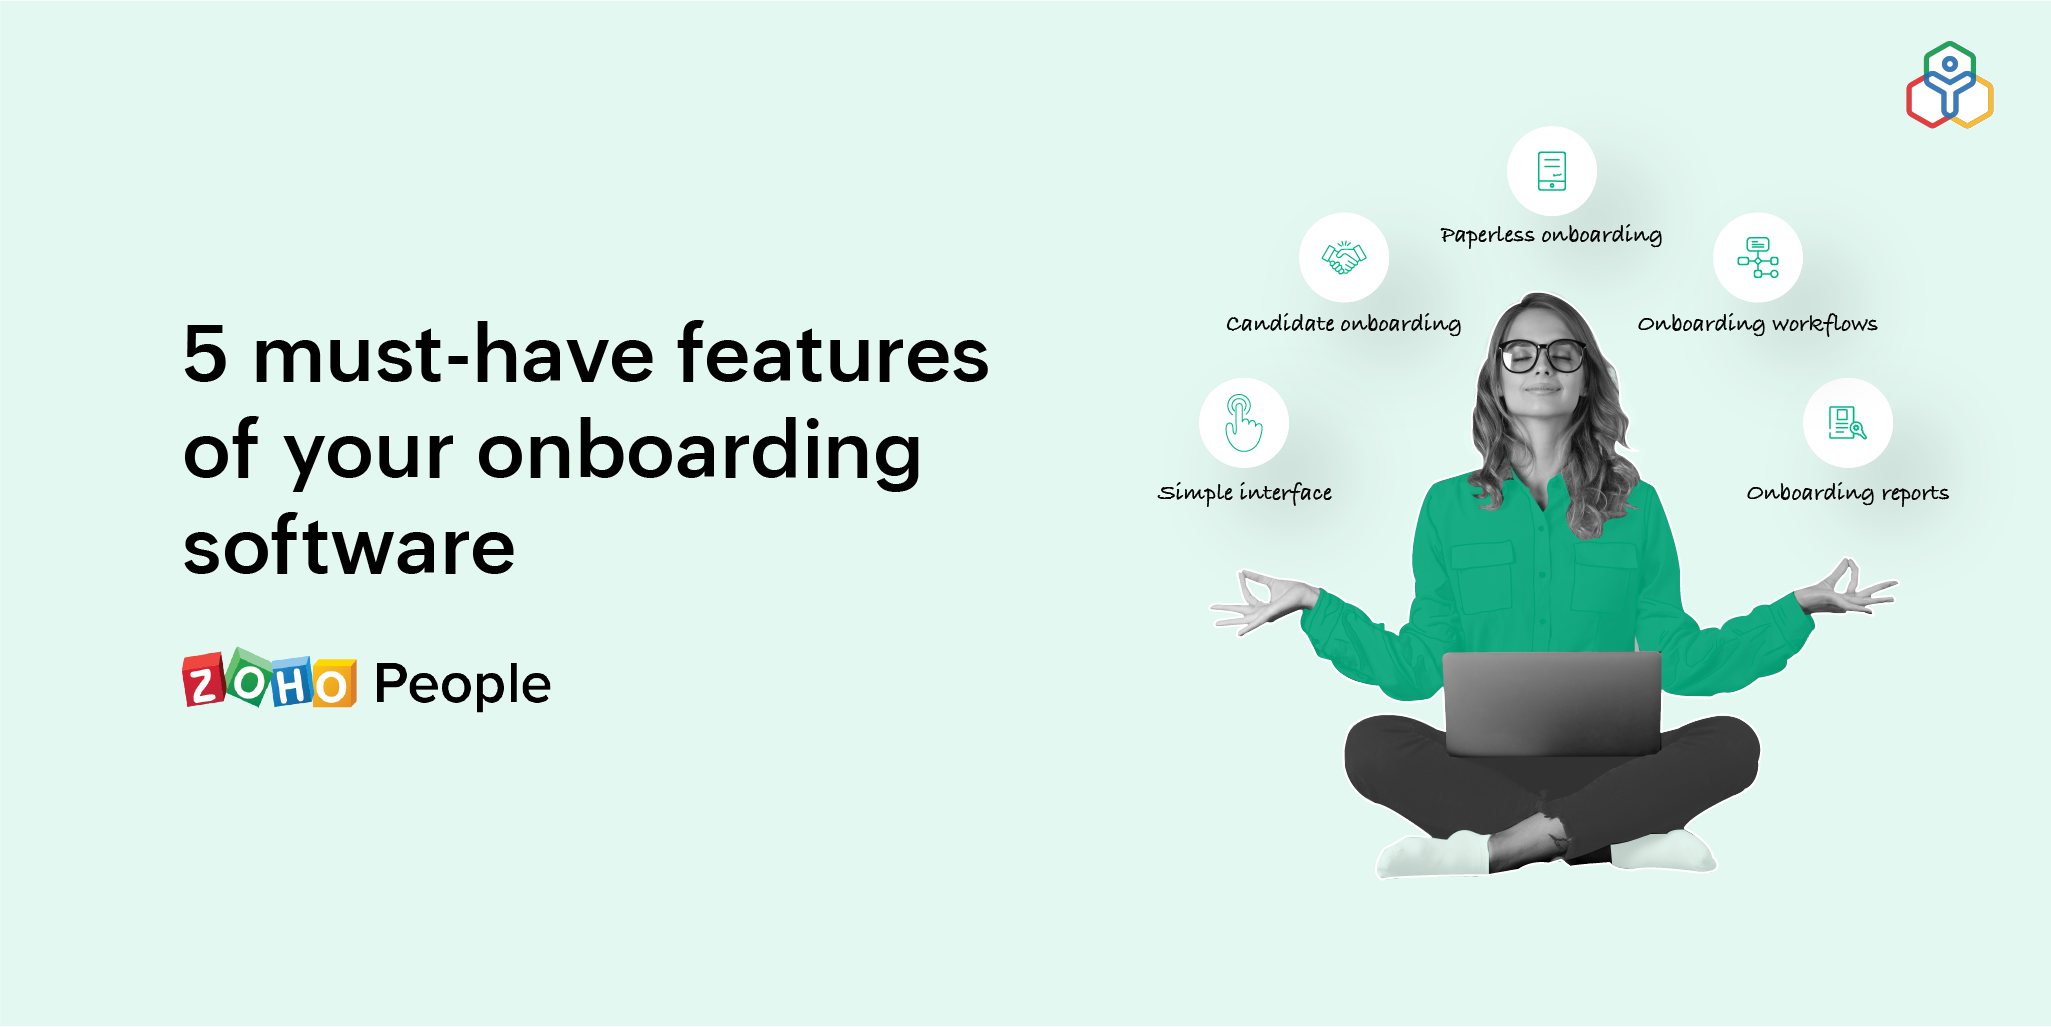 5 features to look out for in onboarding software